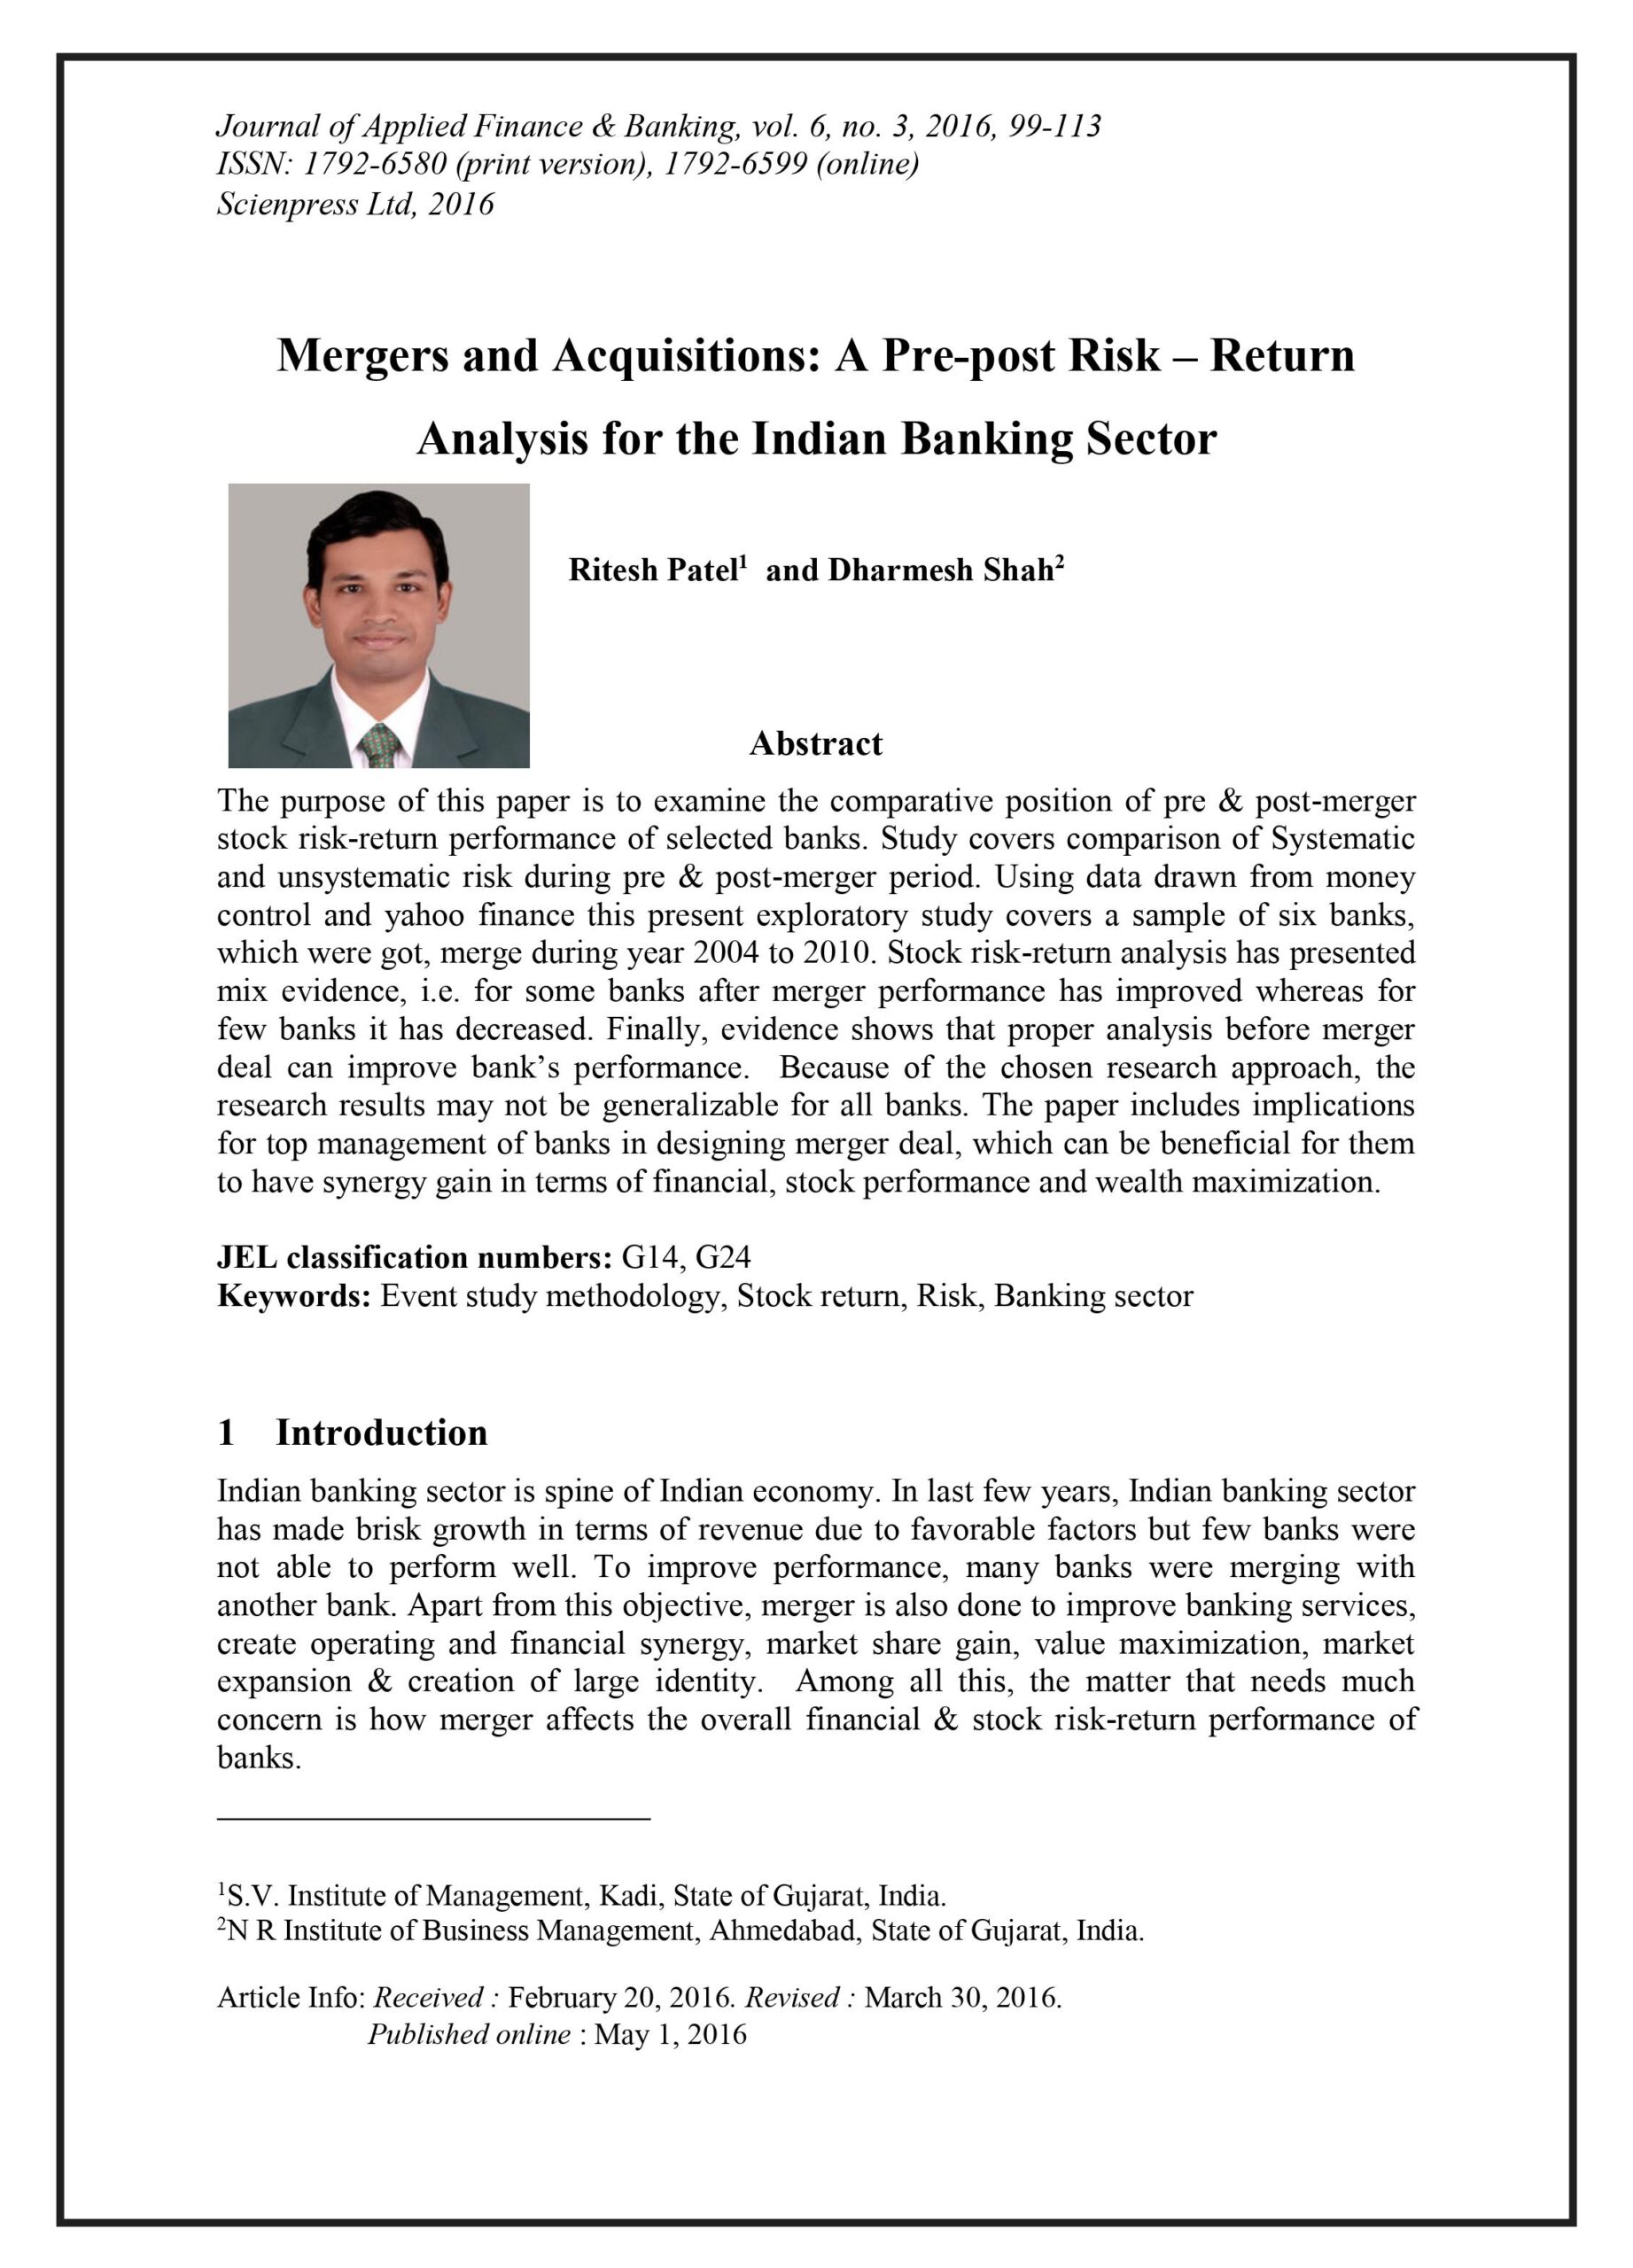 Mergers and Acquisitions: A Pre-post Risk ? Return Analysis for the Indian Banking Sector